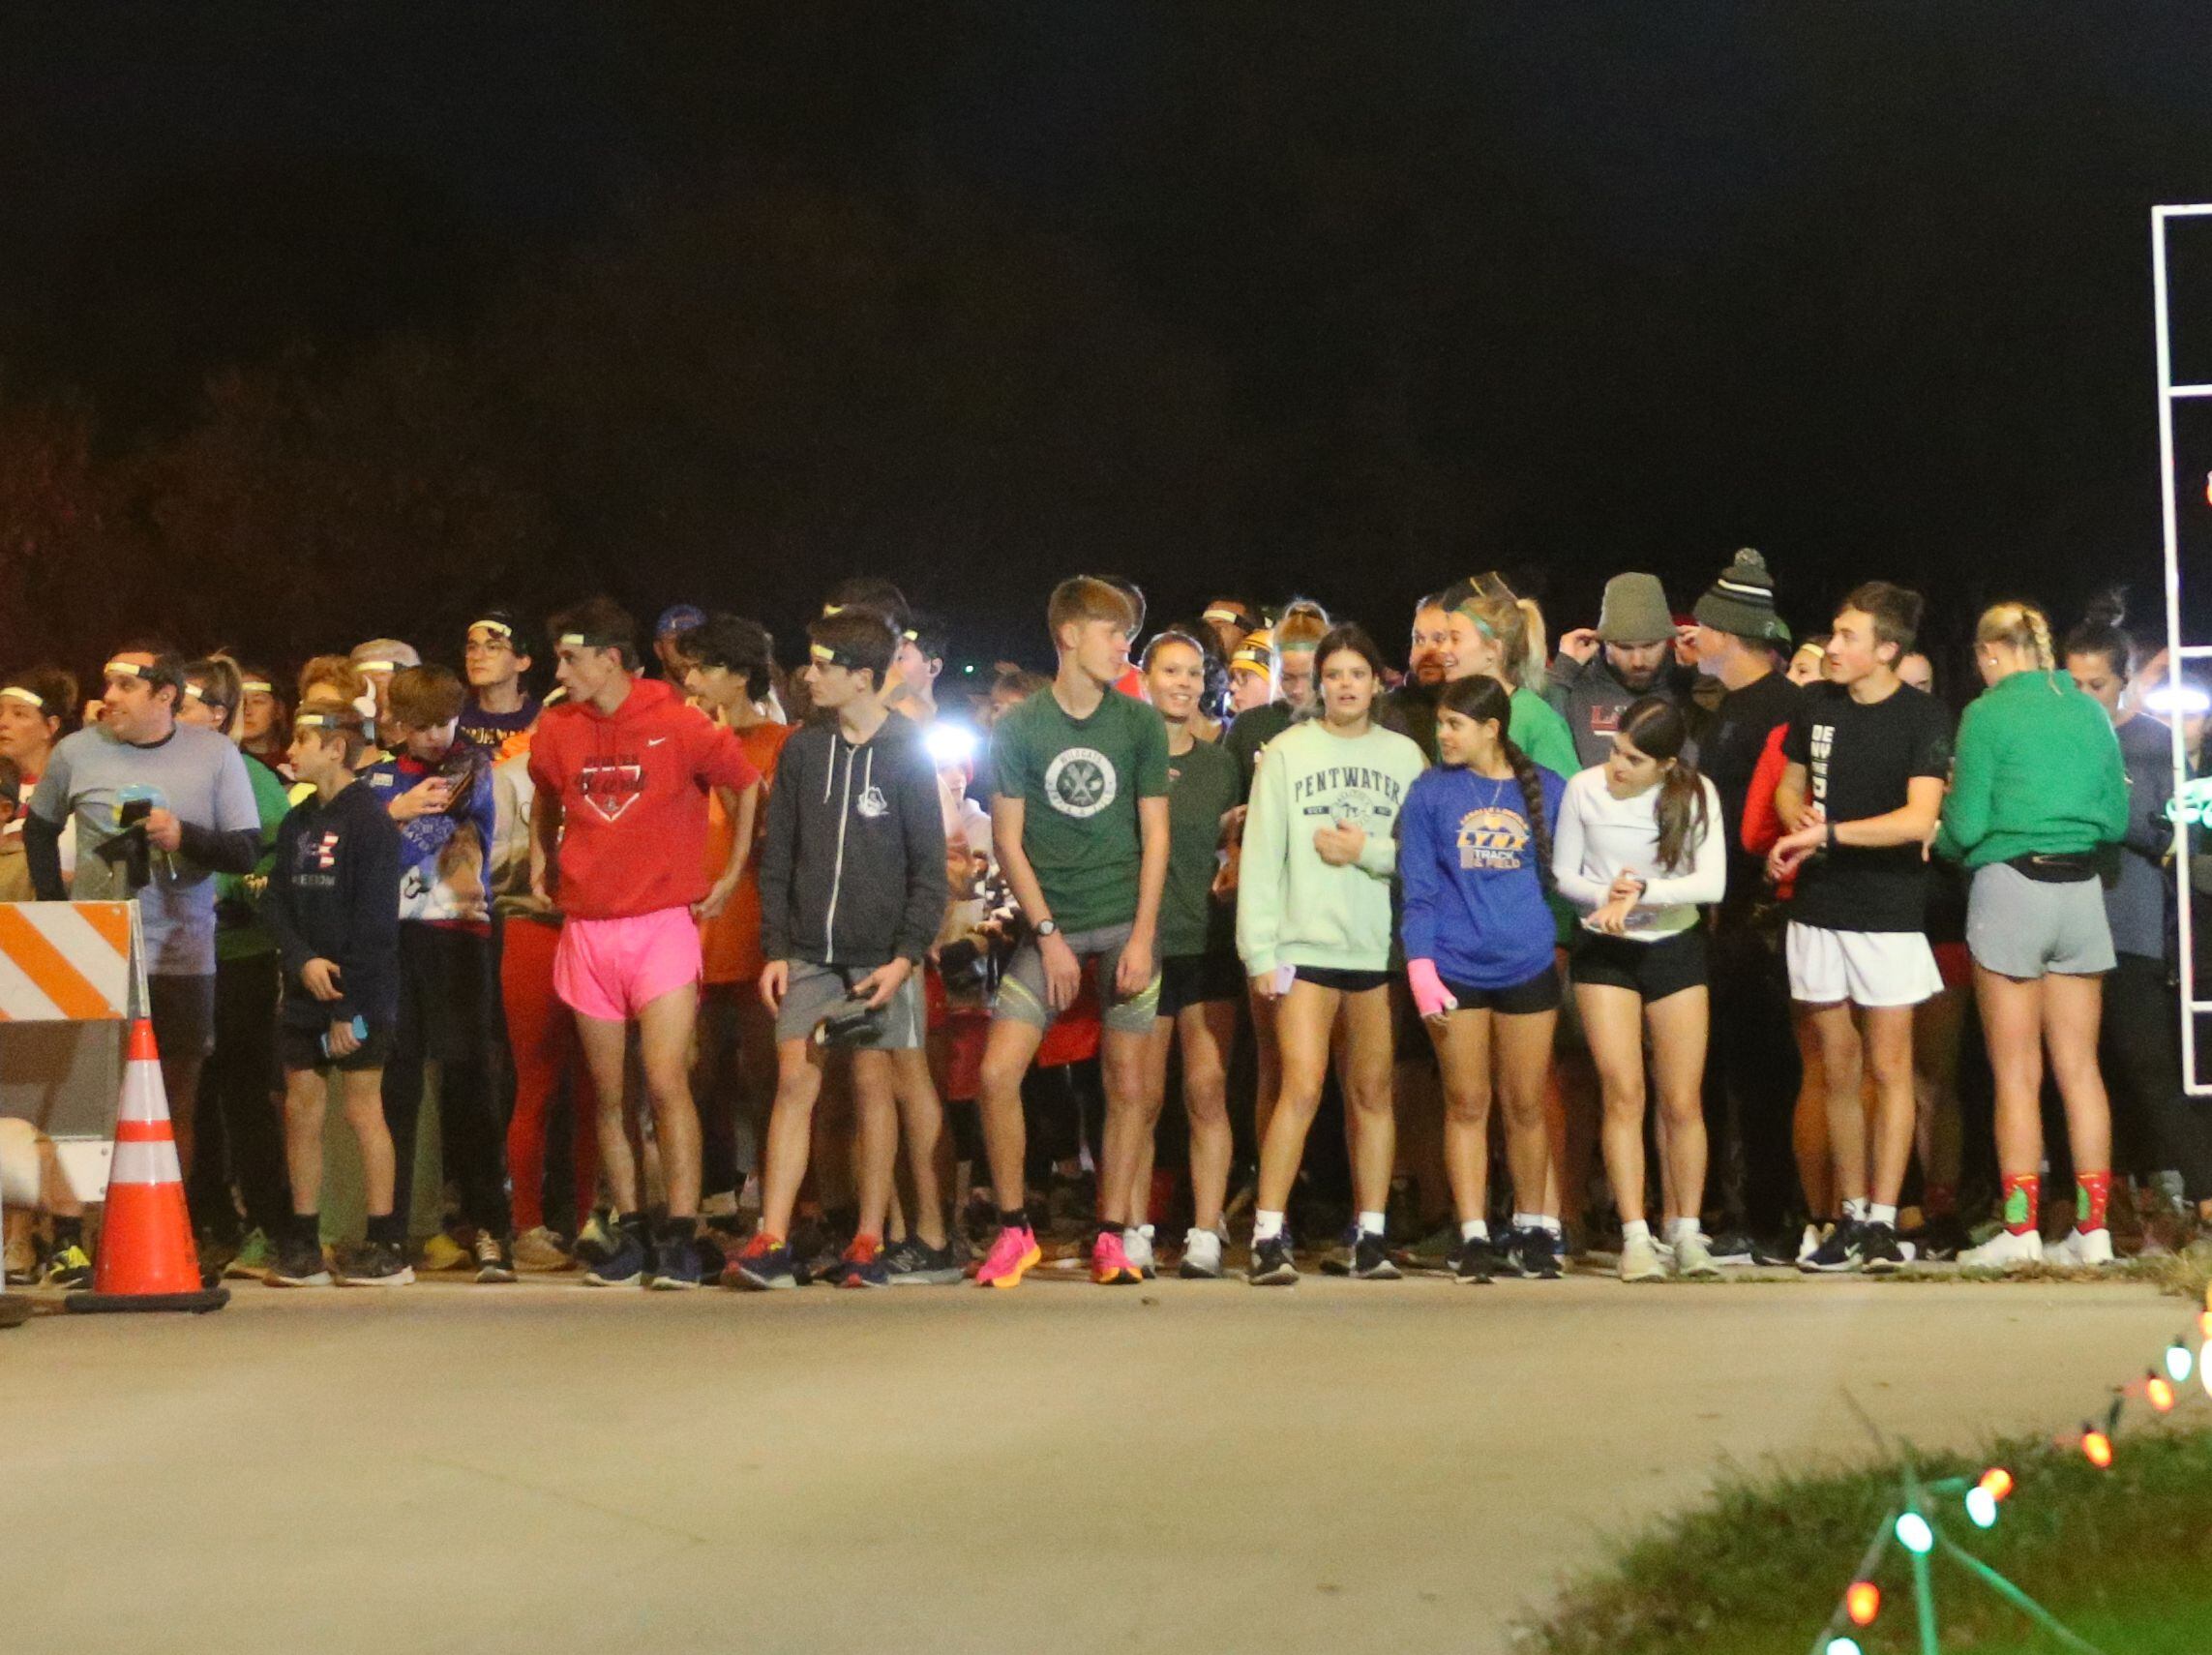 Hundreds of people gather before the Run Run Rudolph 5K Fun Run on Sunday, Nov. 5, 2023 at Rotary Park in La Salle. The Celebration Of Lights is the area’s largest drive-thru Christmas light display, stretching throughout Rotary Park on the east side of La Salle.